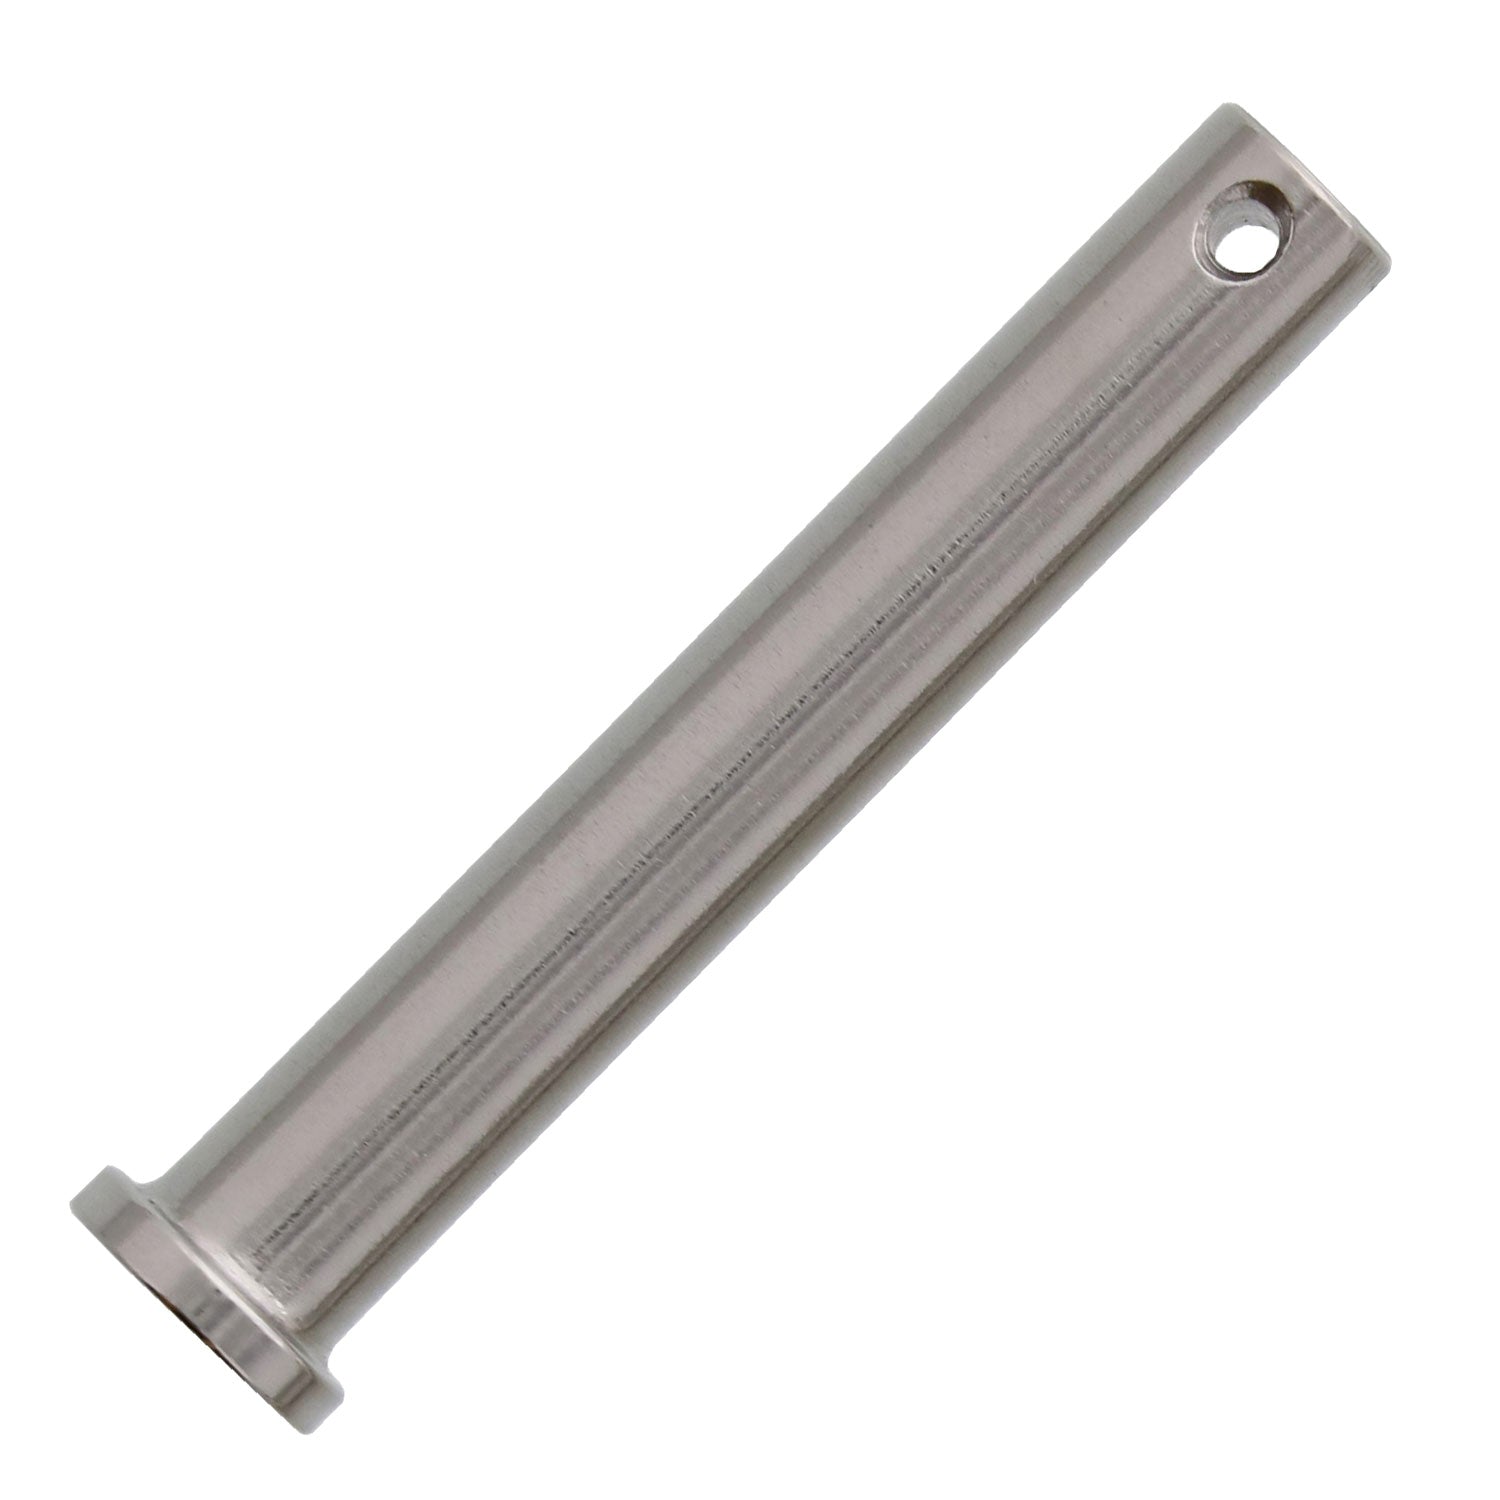 10mm x 58mm Stainless Steel Clevis Pin